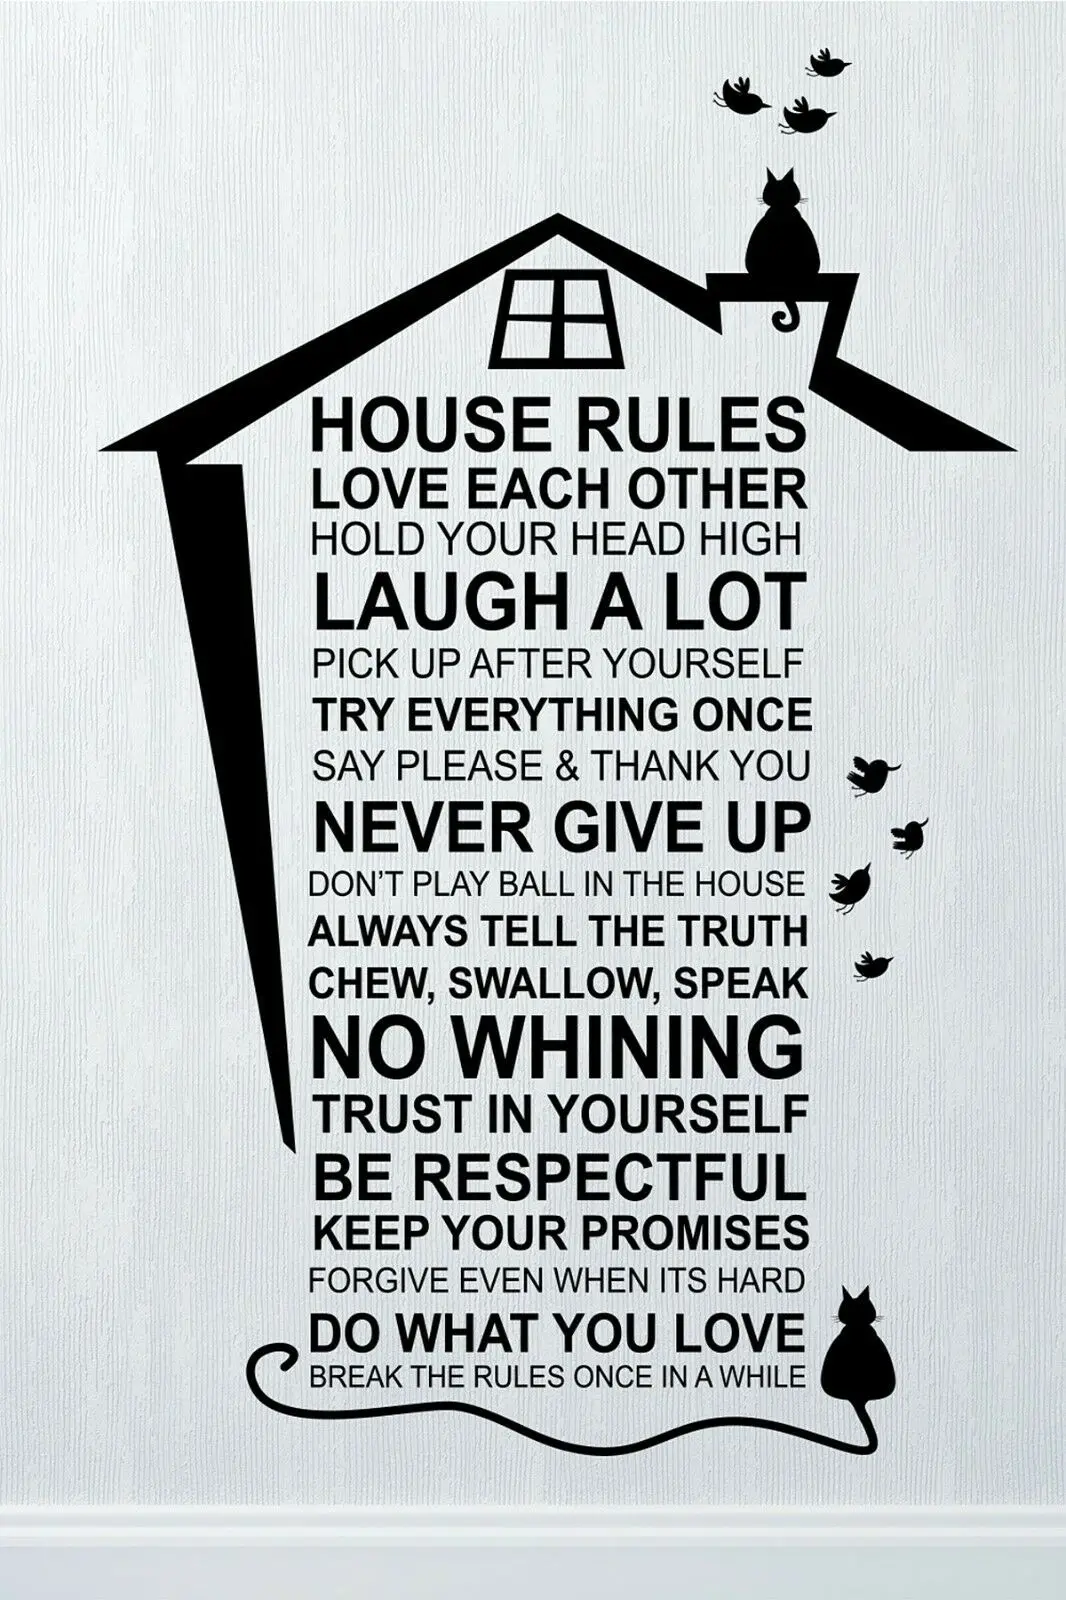 The rules of the house